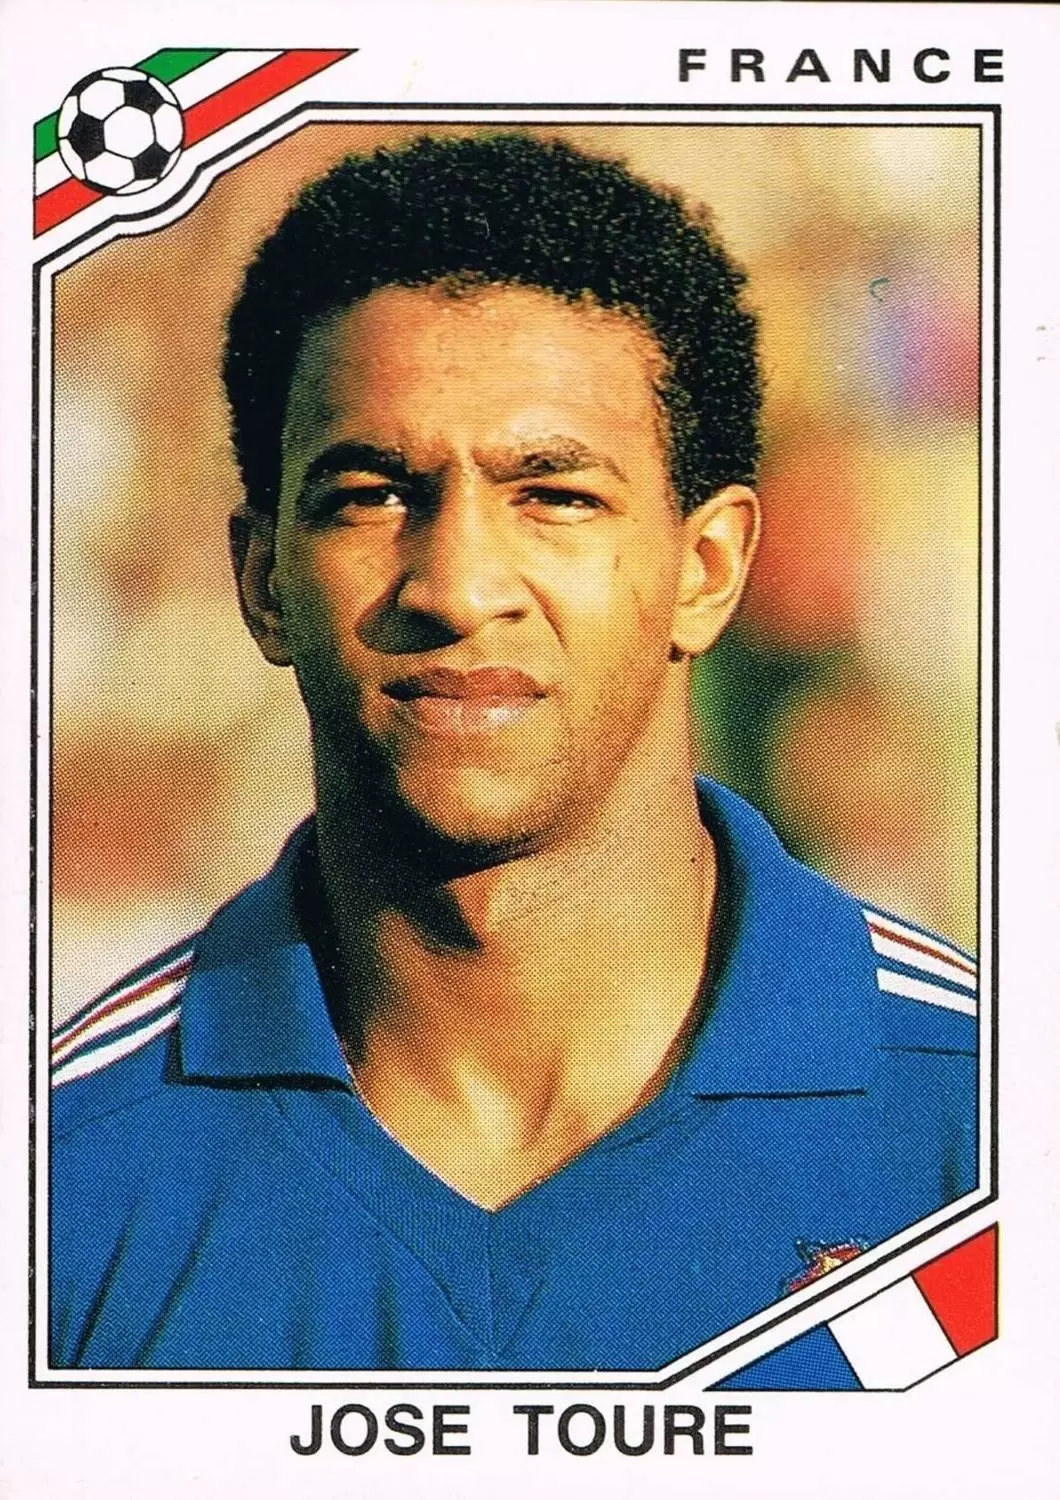 Mexico 86 World Cup - Jose Toure  - France